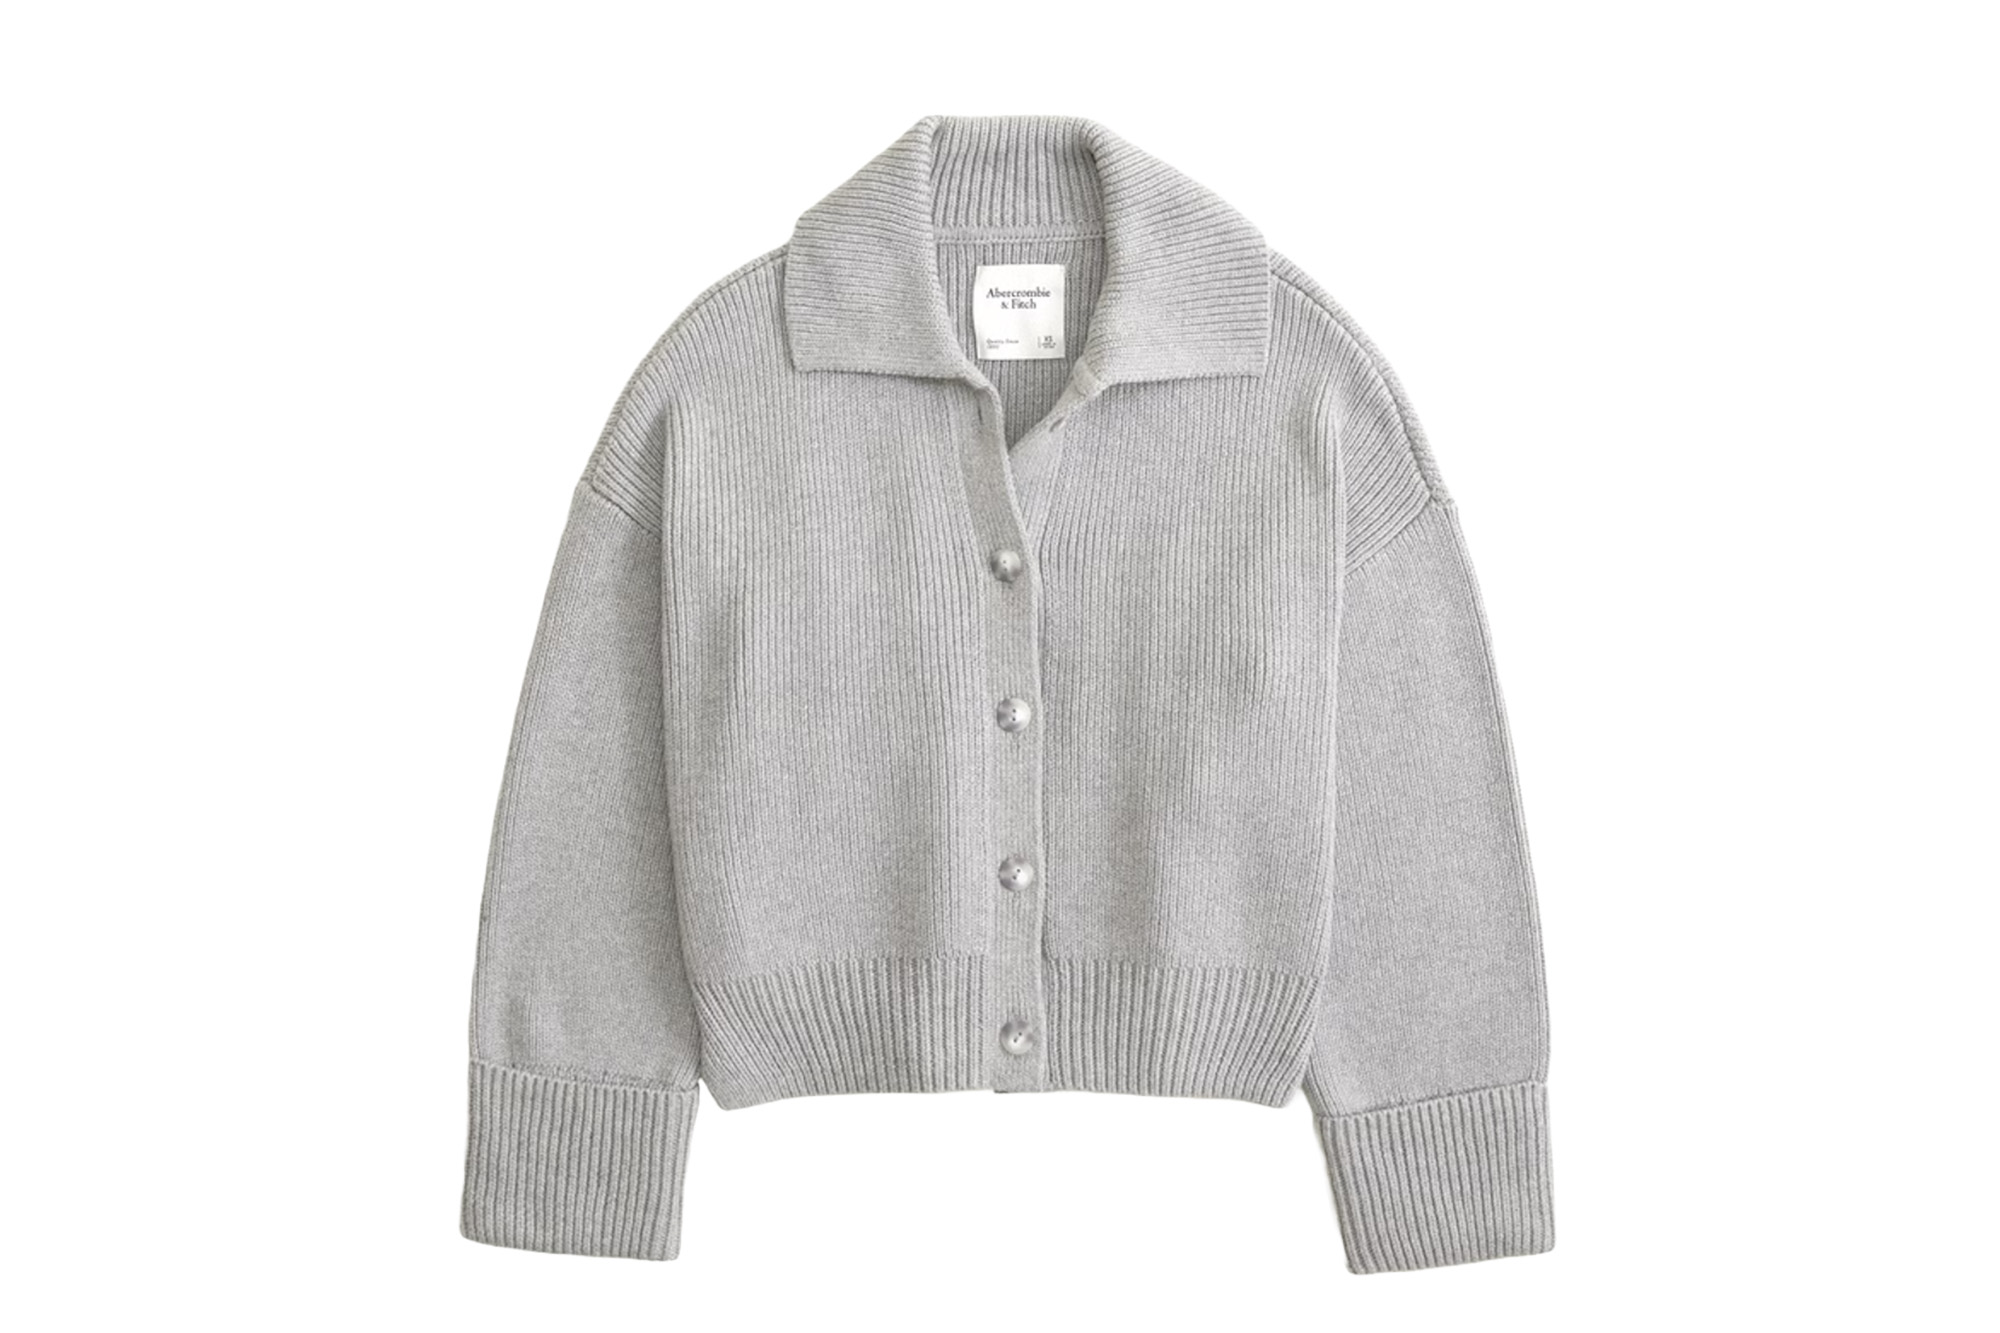 A gray collared cardigan